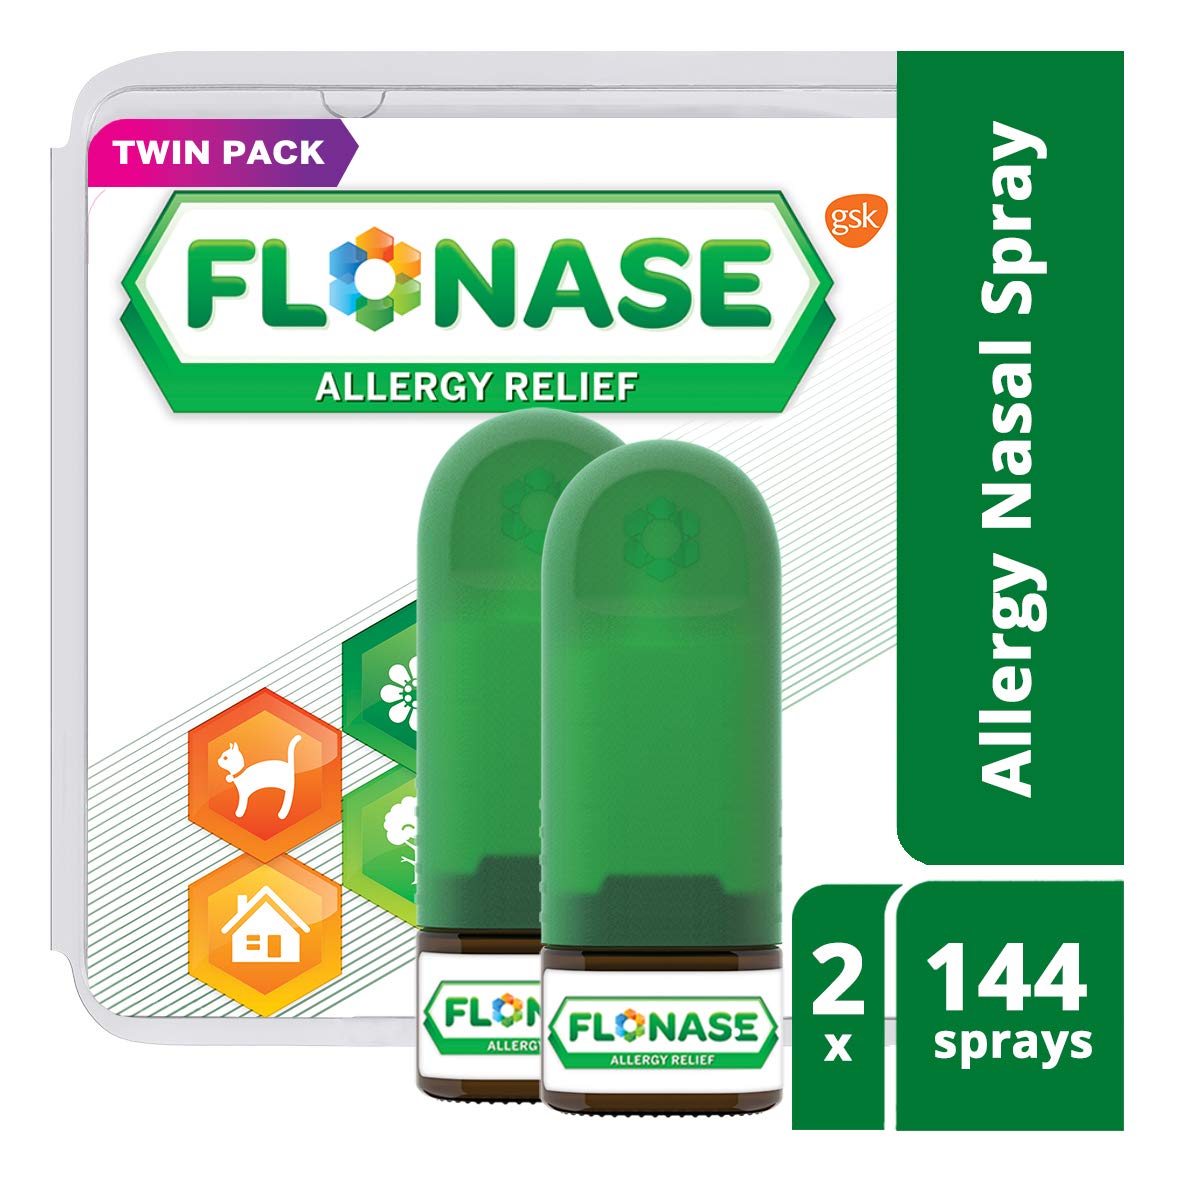 can i use nasal spray more than once a day